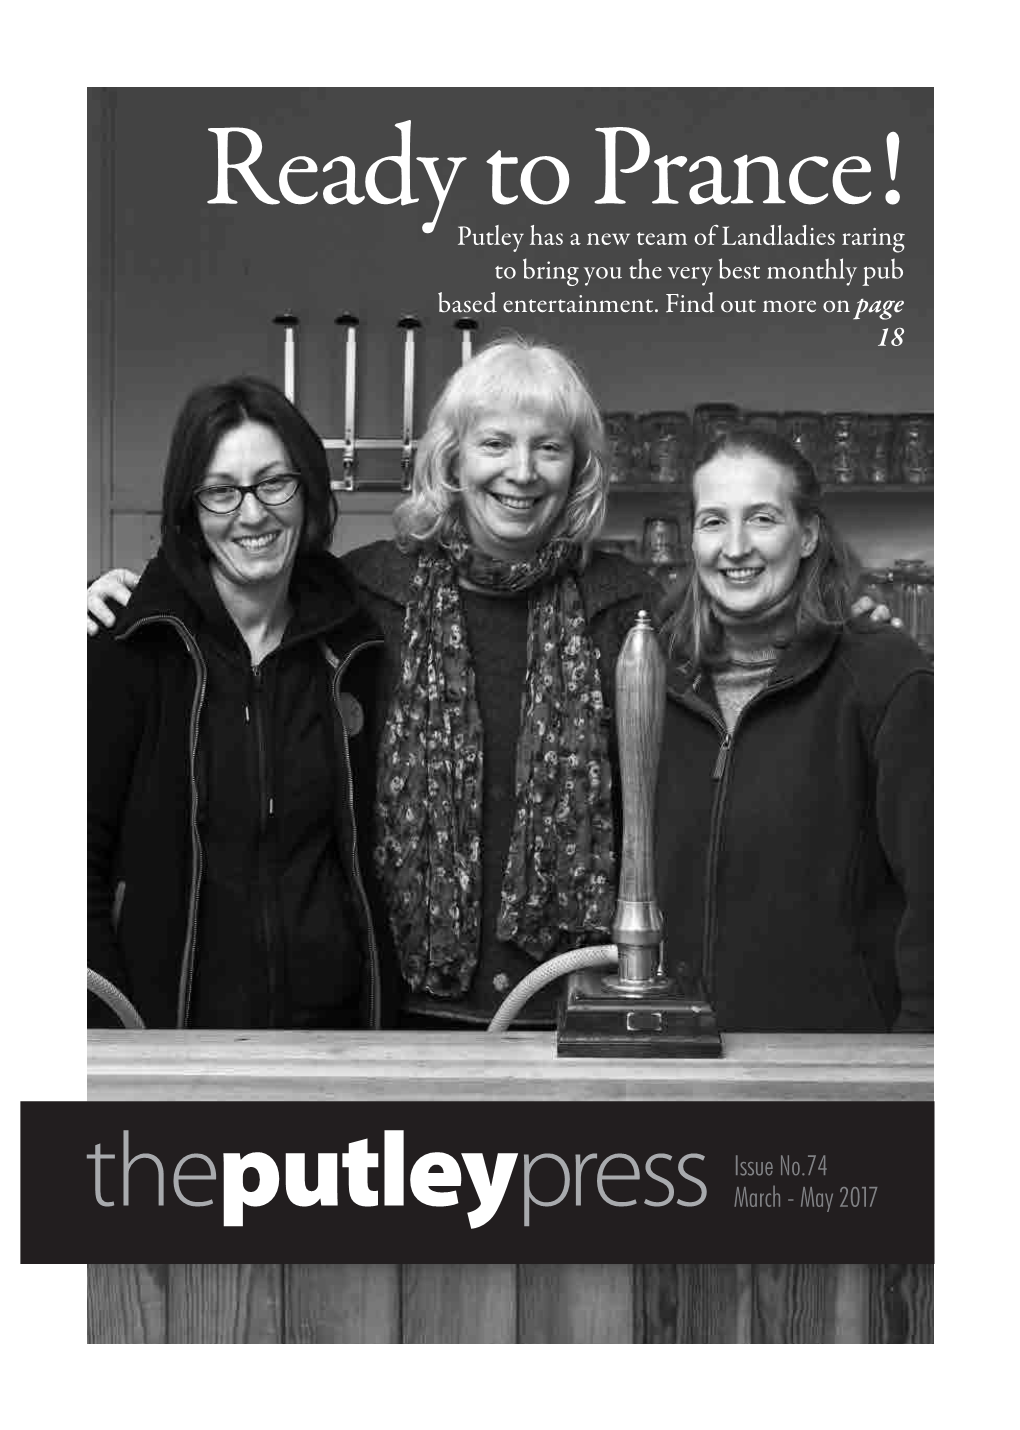 Ready to Prance! Putley Has a New Team of Landladies Raring to Bring You the Very Best Monthly Pub Based Entertainment